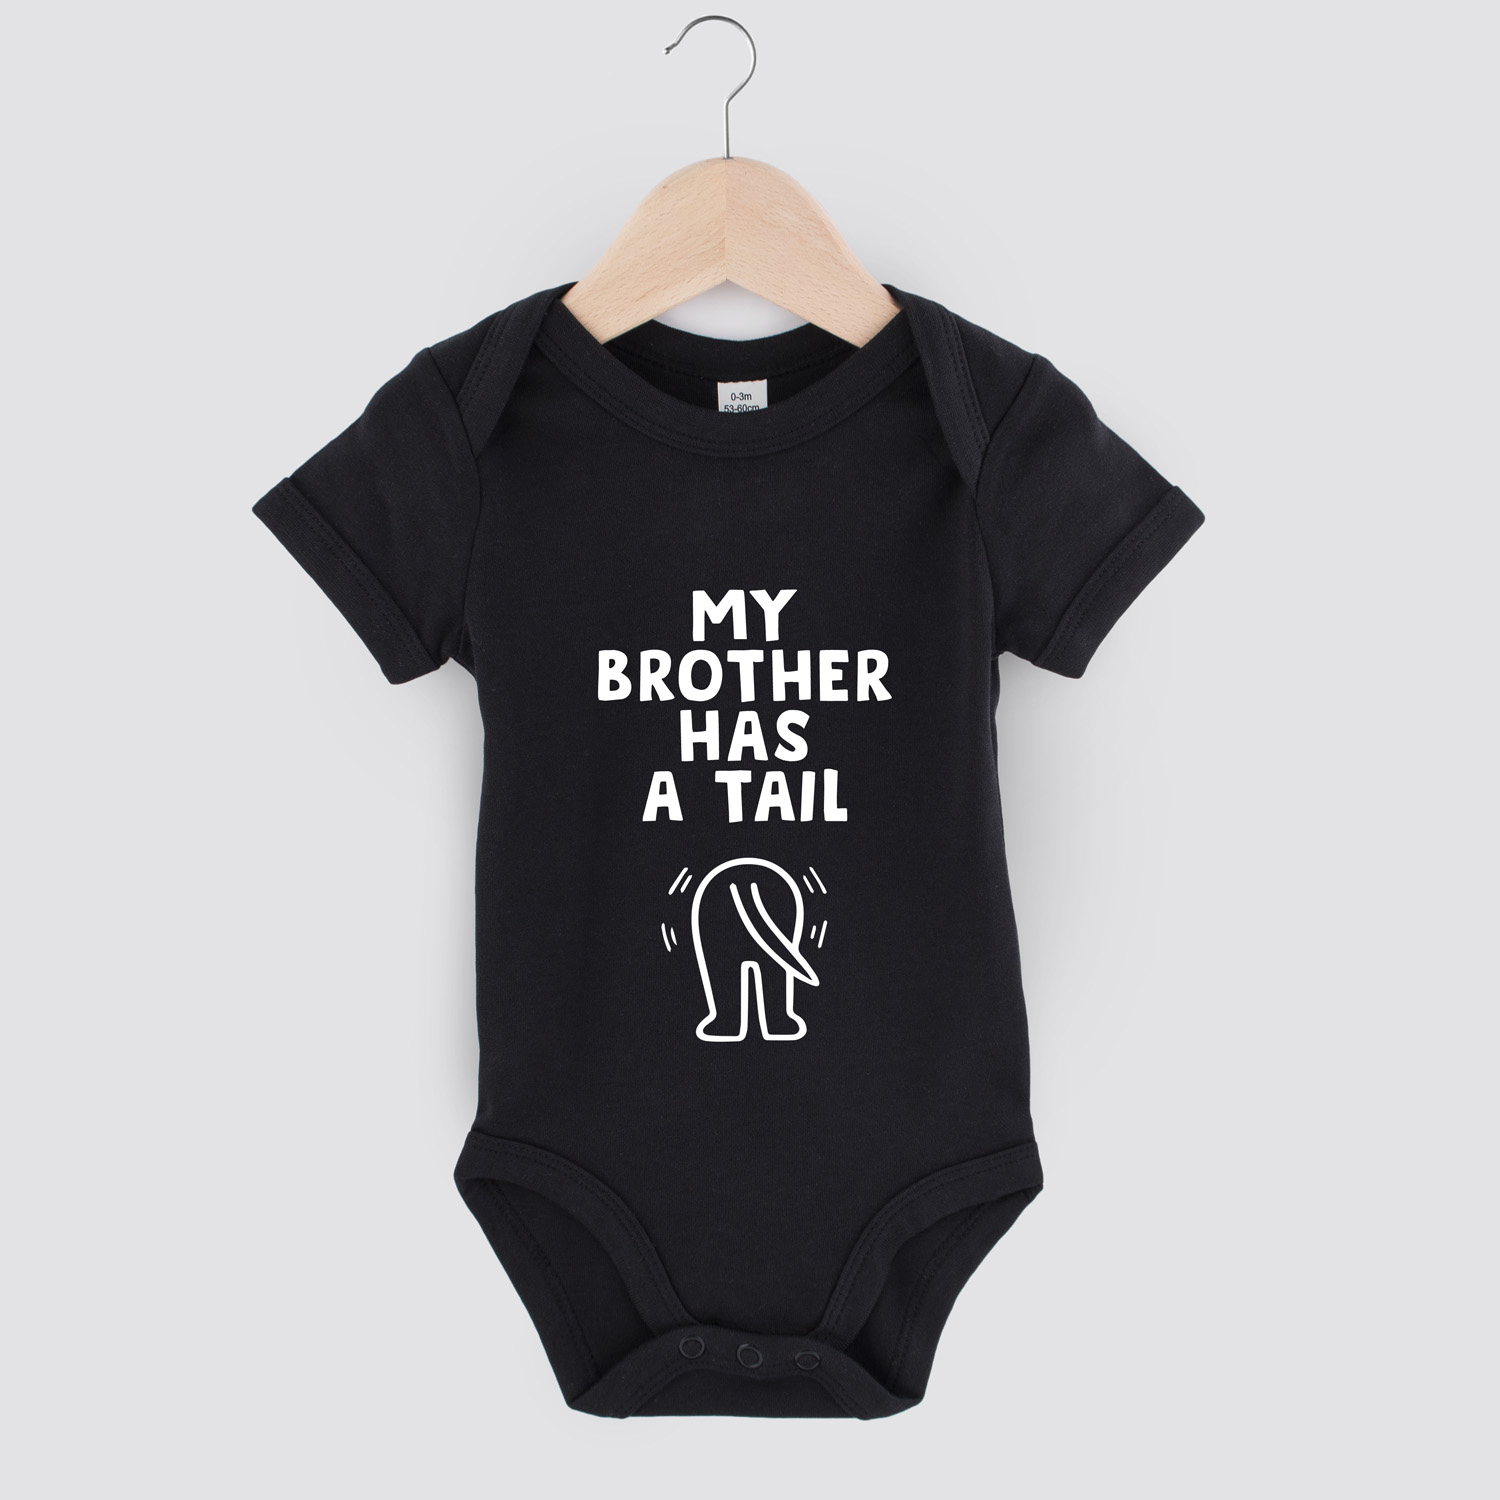 my-brother-has-a-tail-baby-romper-zwart.jpg